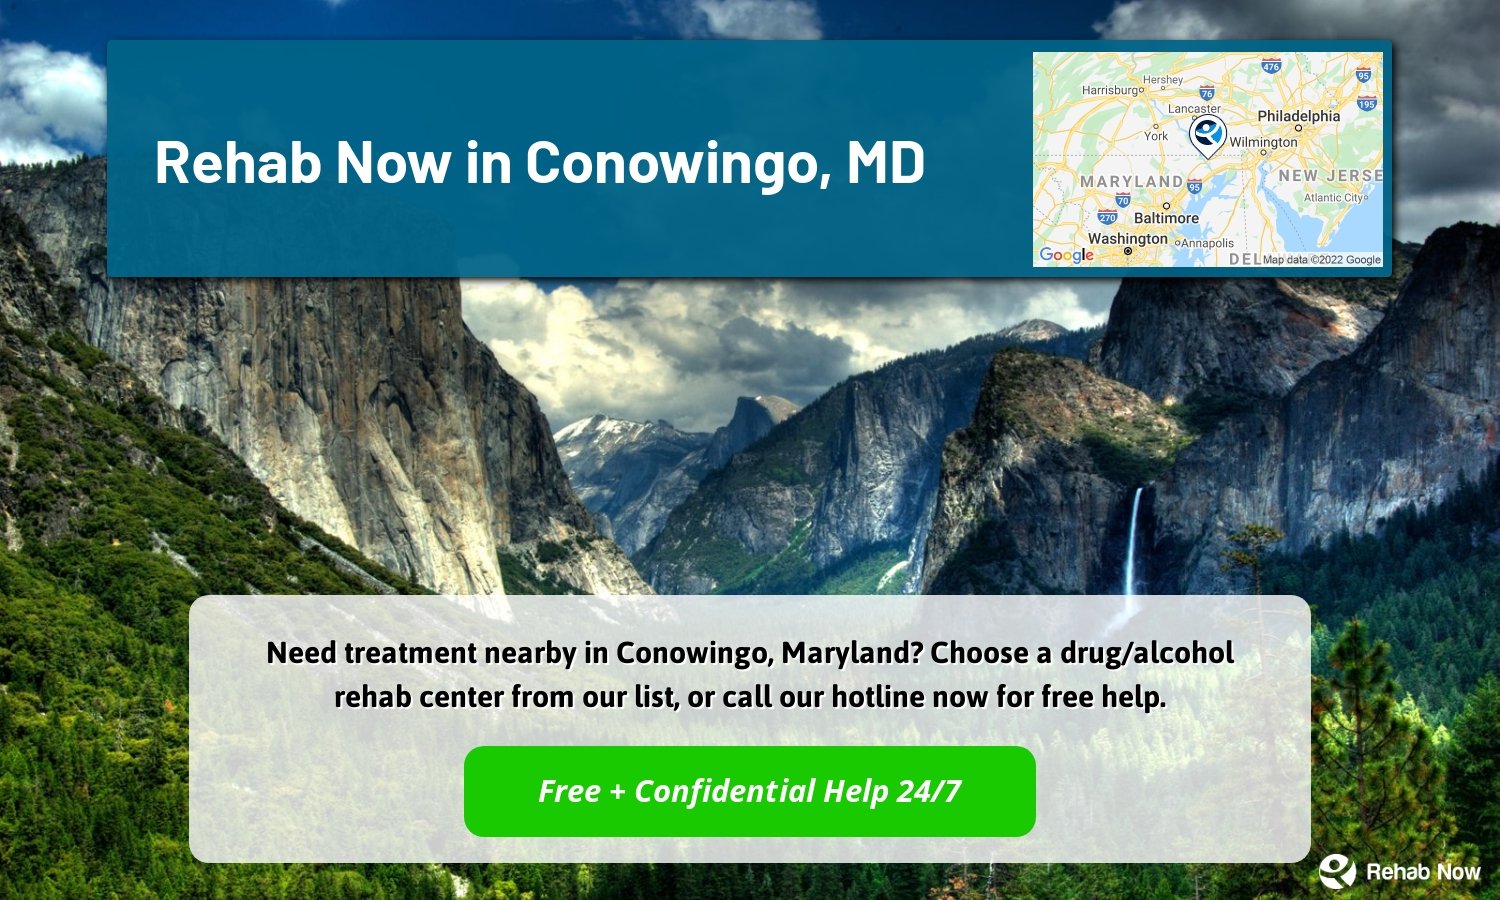 Need treatment nearby in Conowingo, Maryland? Choose a drug/alcohol rehab center from our list, or call our hotline now for free help.